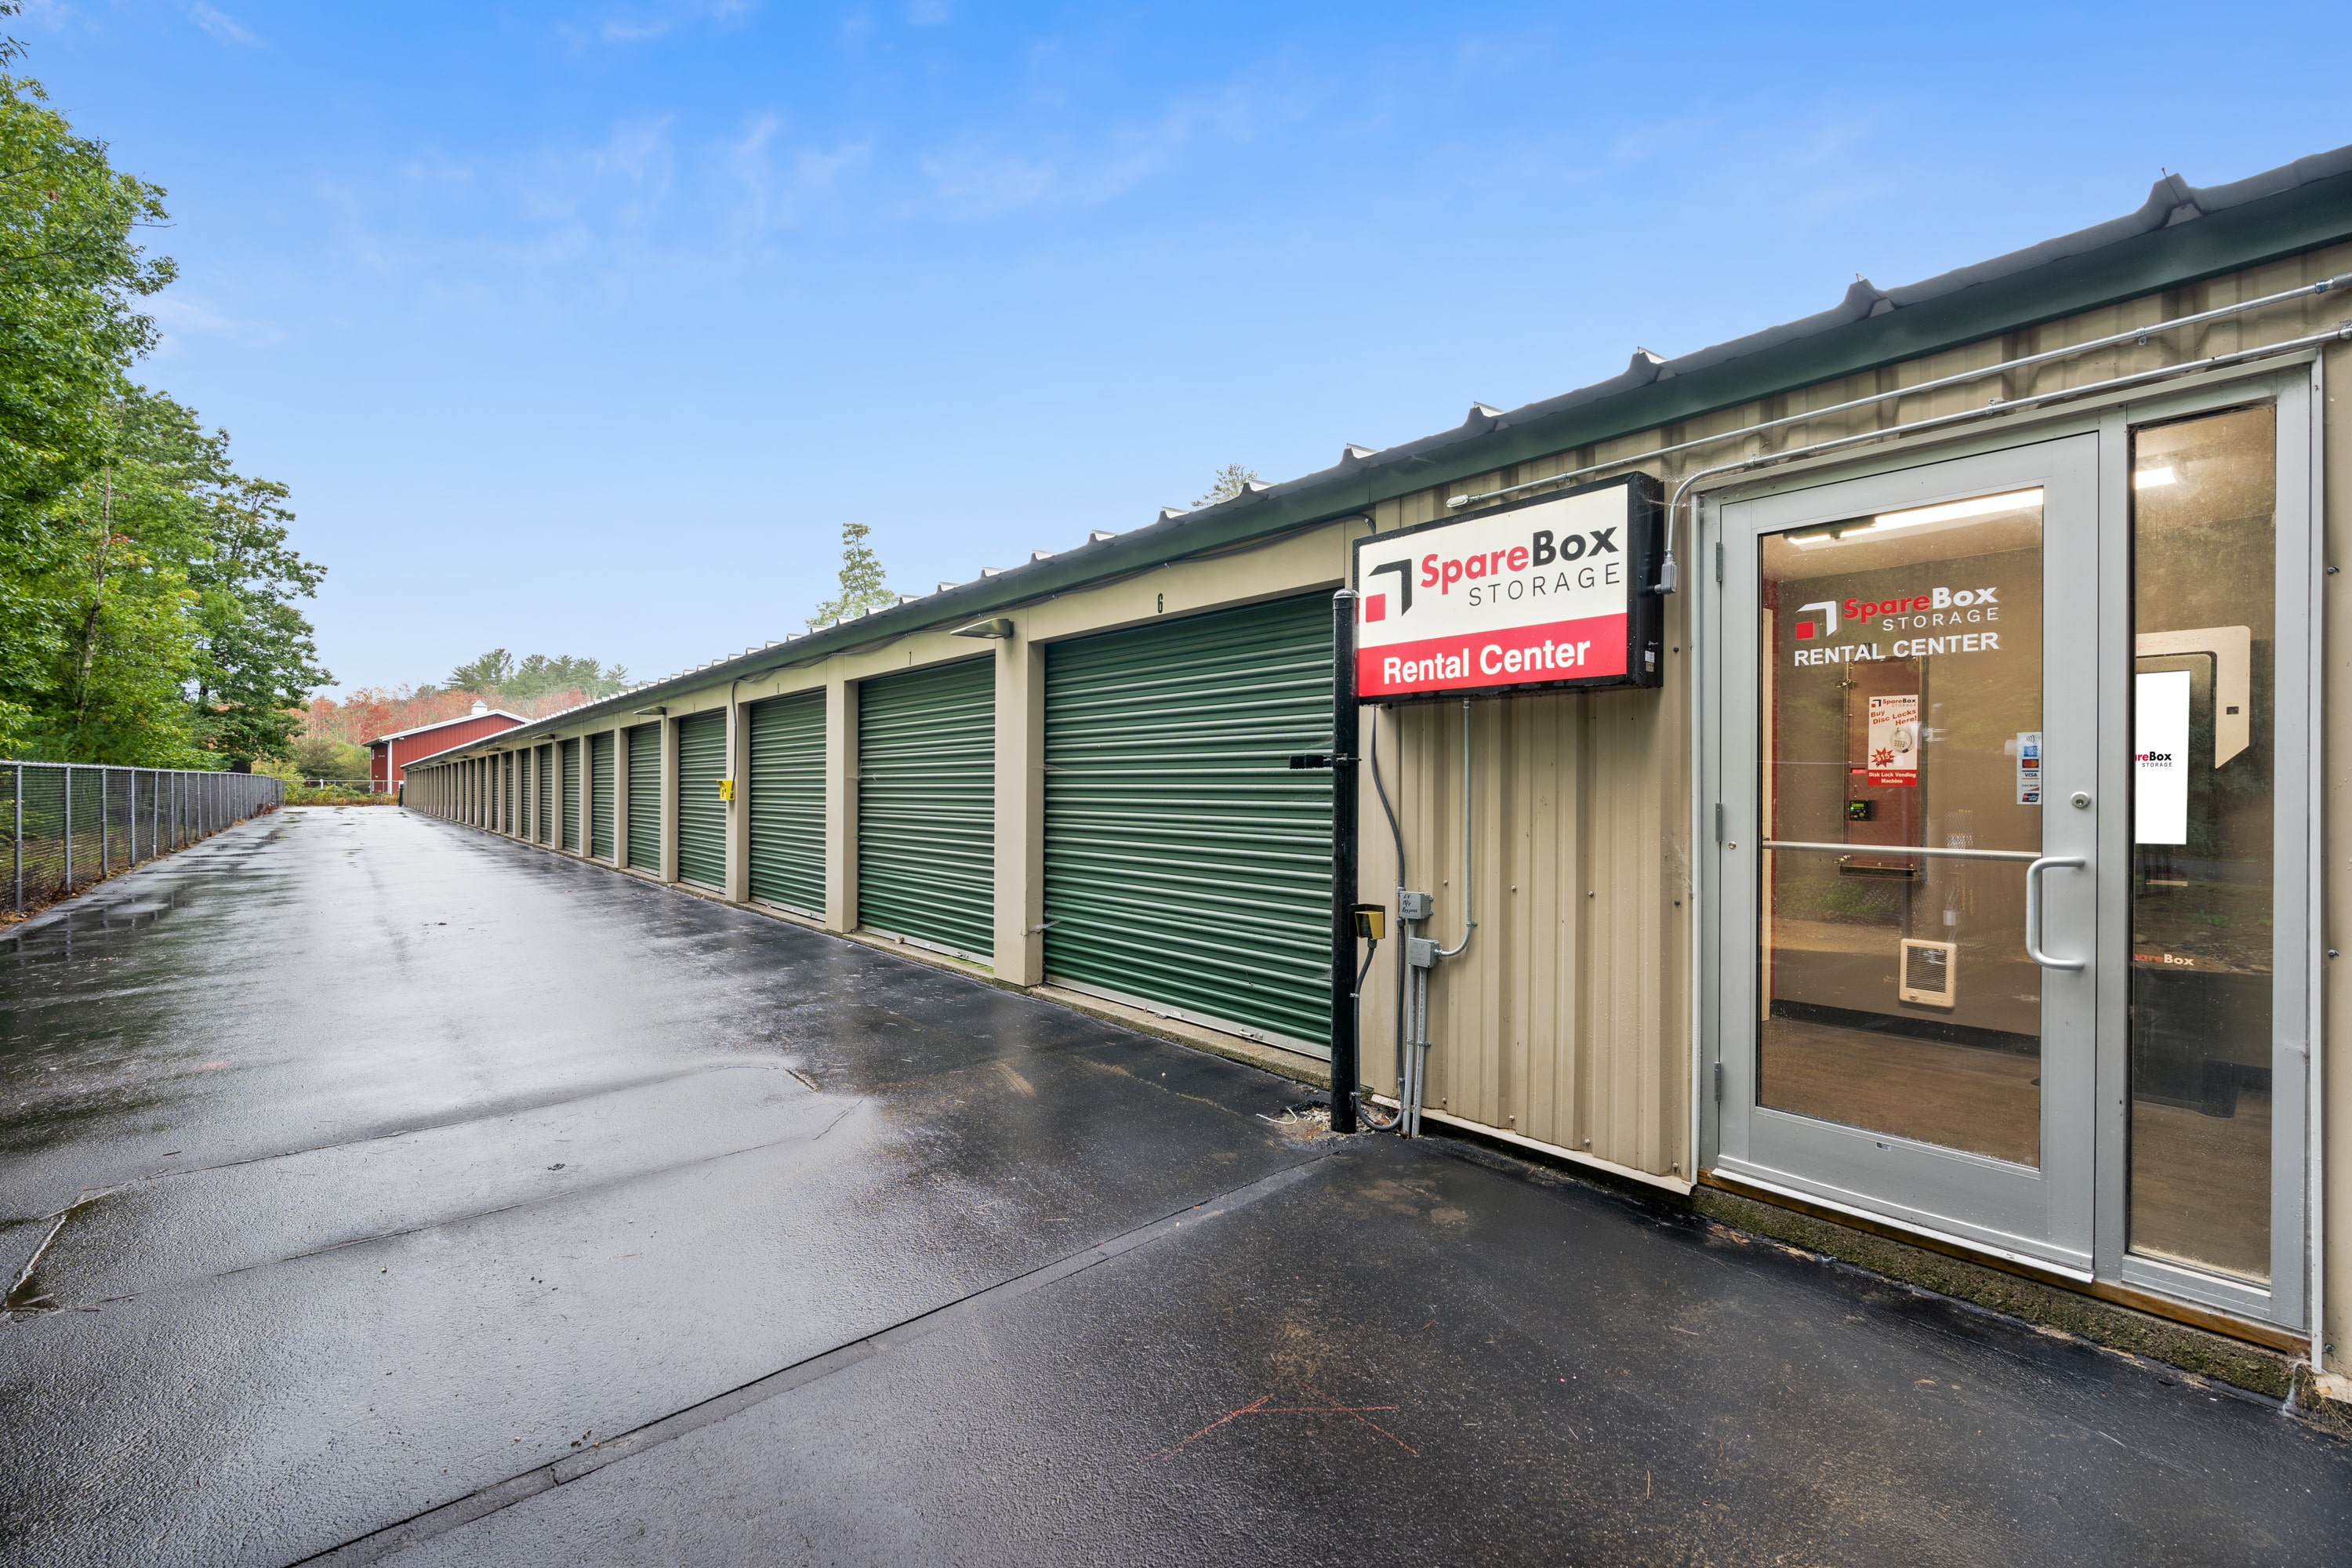 SpareBox Storage in Amherst, NH, has multiple self-storage unit sizes and options | SpareBox Storage